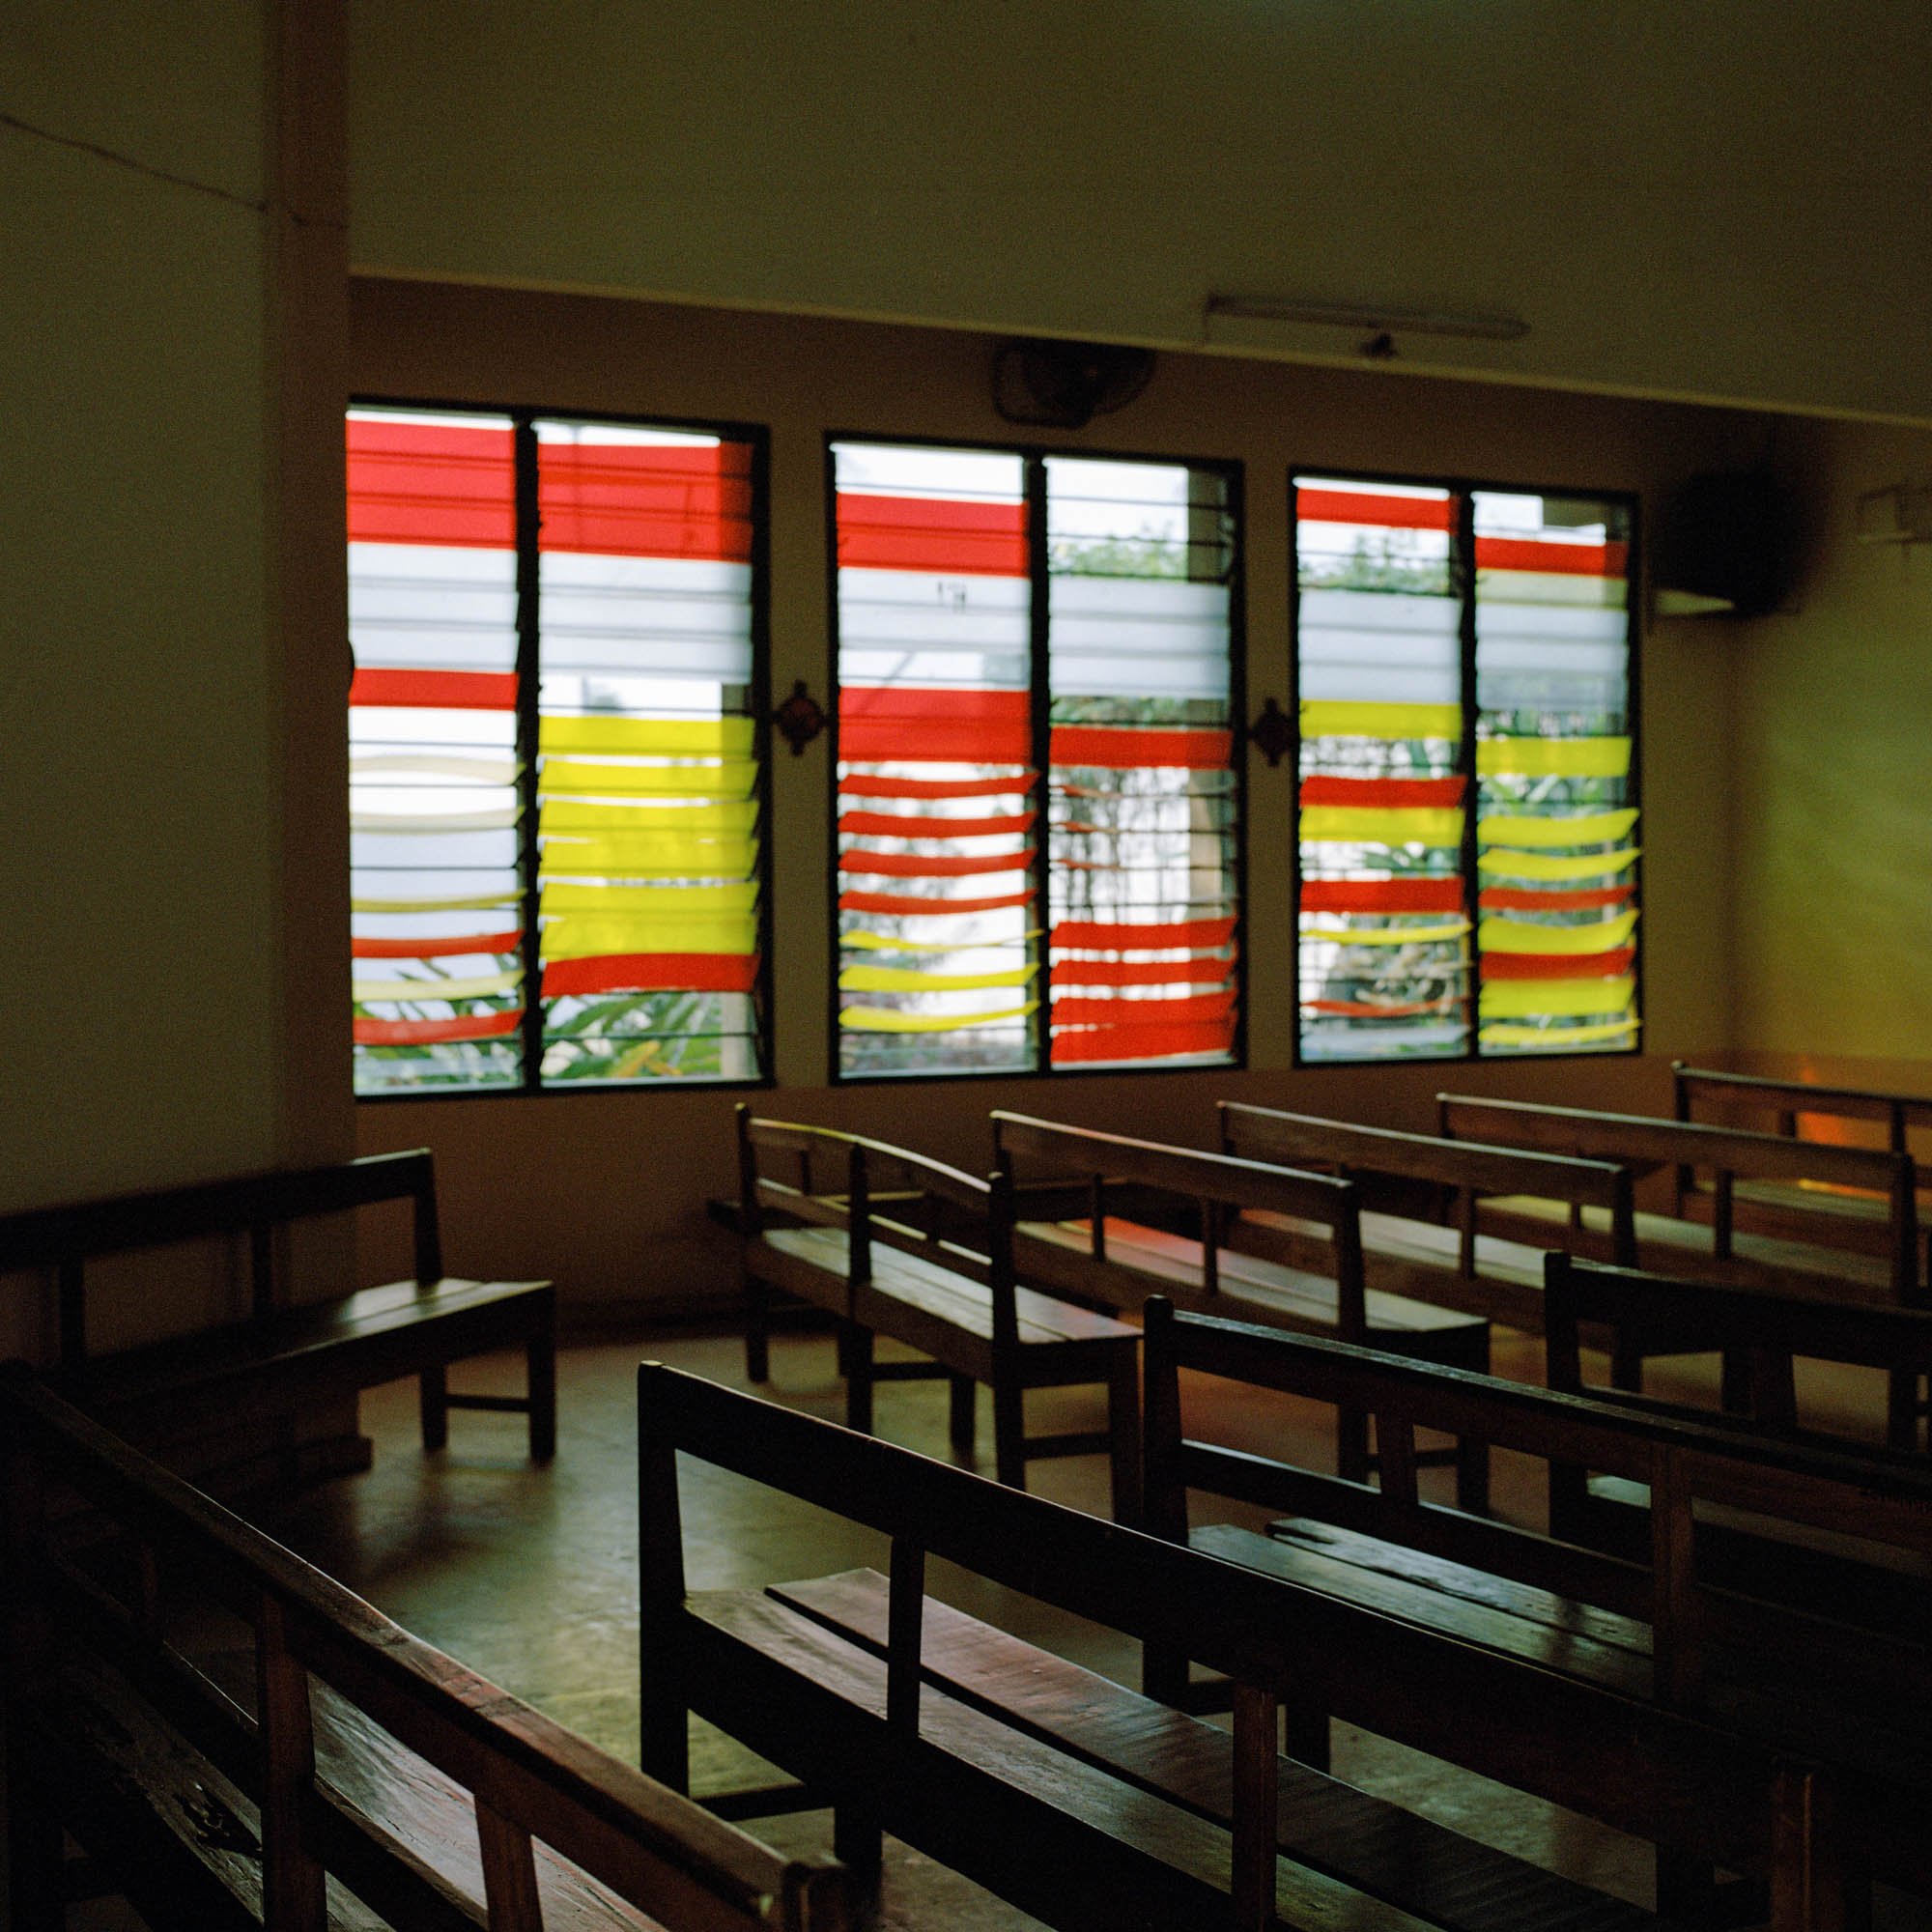 In the meanders of Saint Joseph's Hospital, a denominational health care institution in the heart of the Limete commune in Kinshasa, a chapel welcomes patients' prayers. Religion has a special place in the structure founded in 1987 